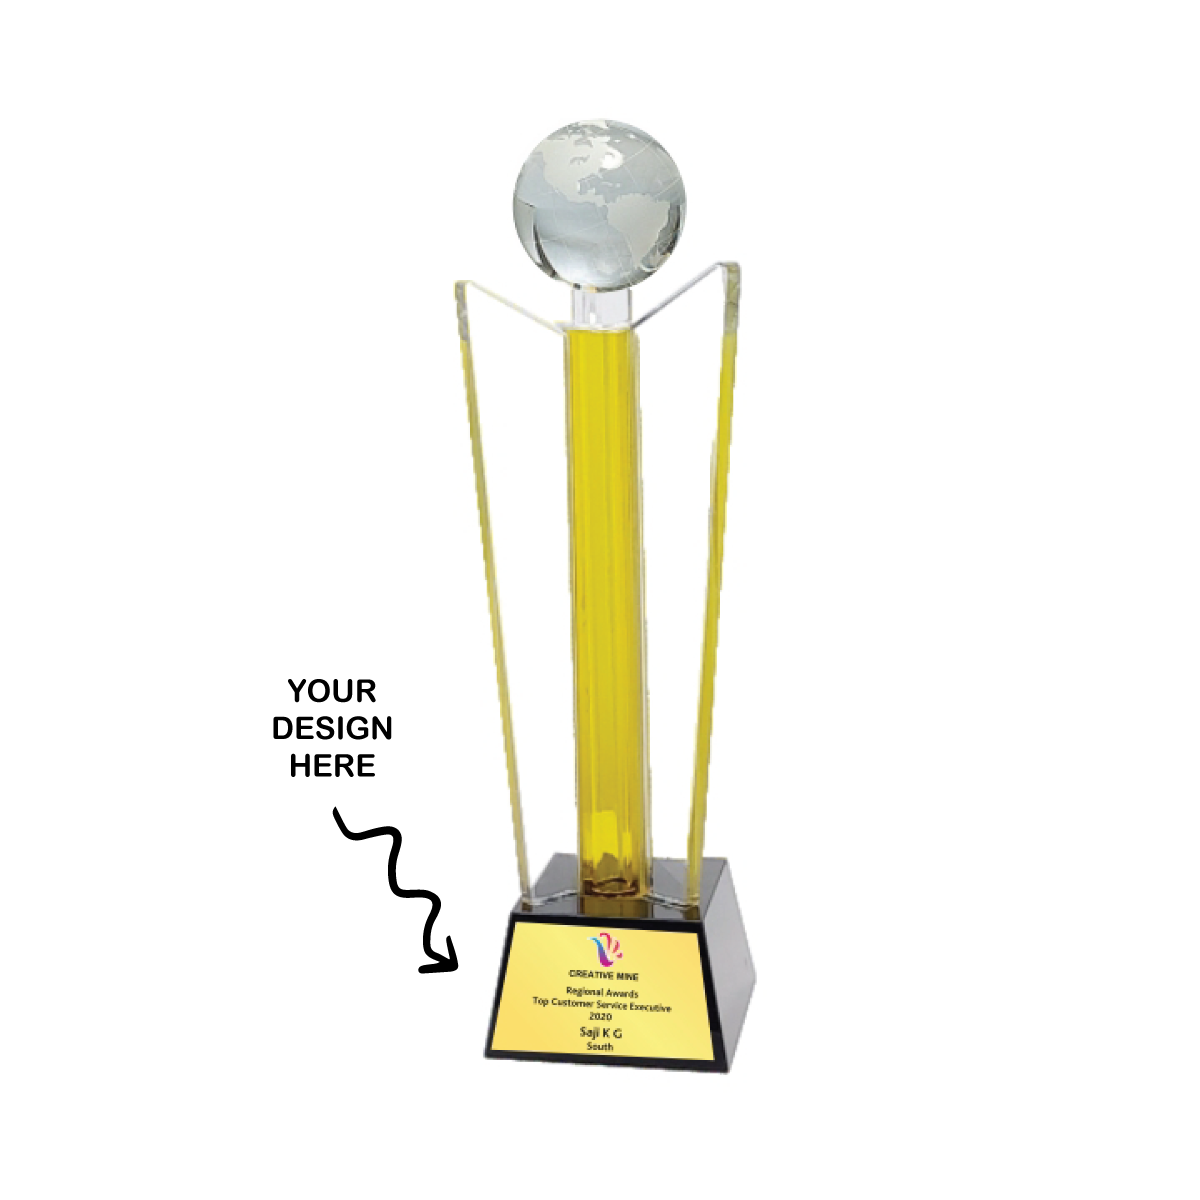 Personalized Optic Crystal Award Trophy - For Employee Recognition, Corporate Gifting, Award Shows, Sports Event, Competition, Students Reward - MA531